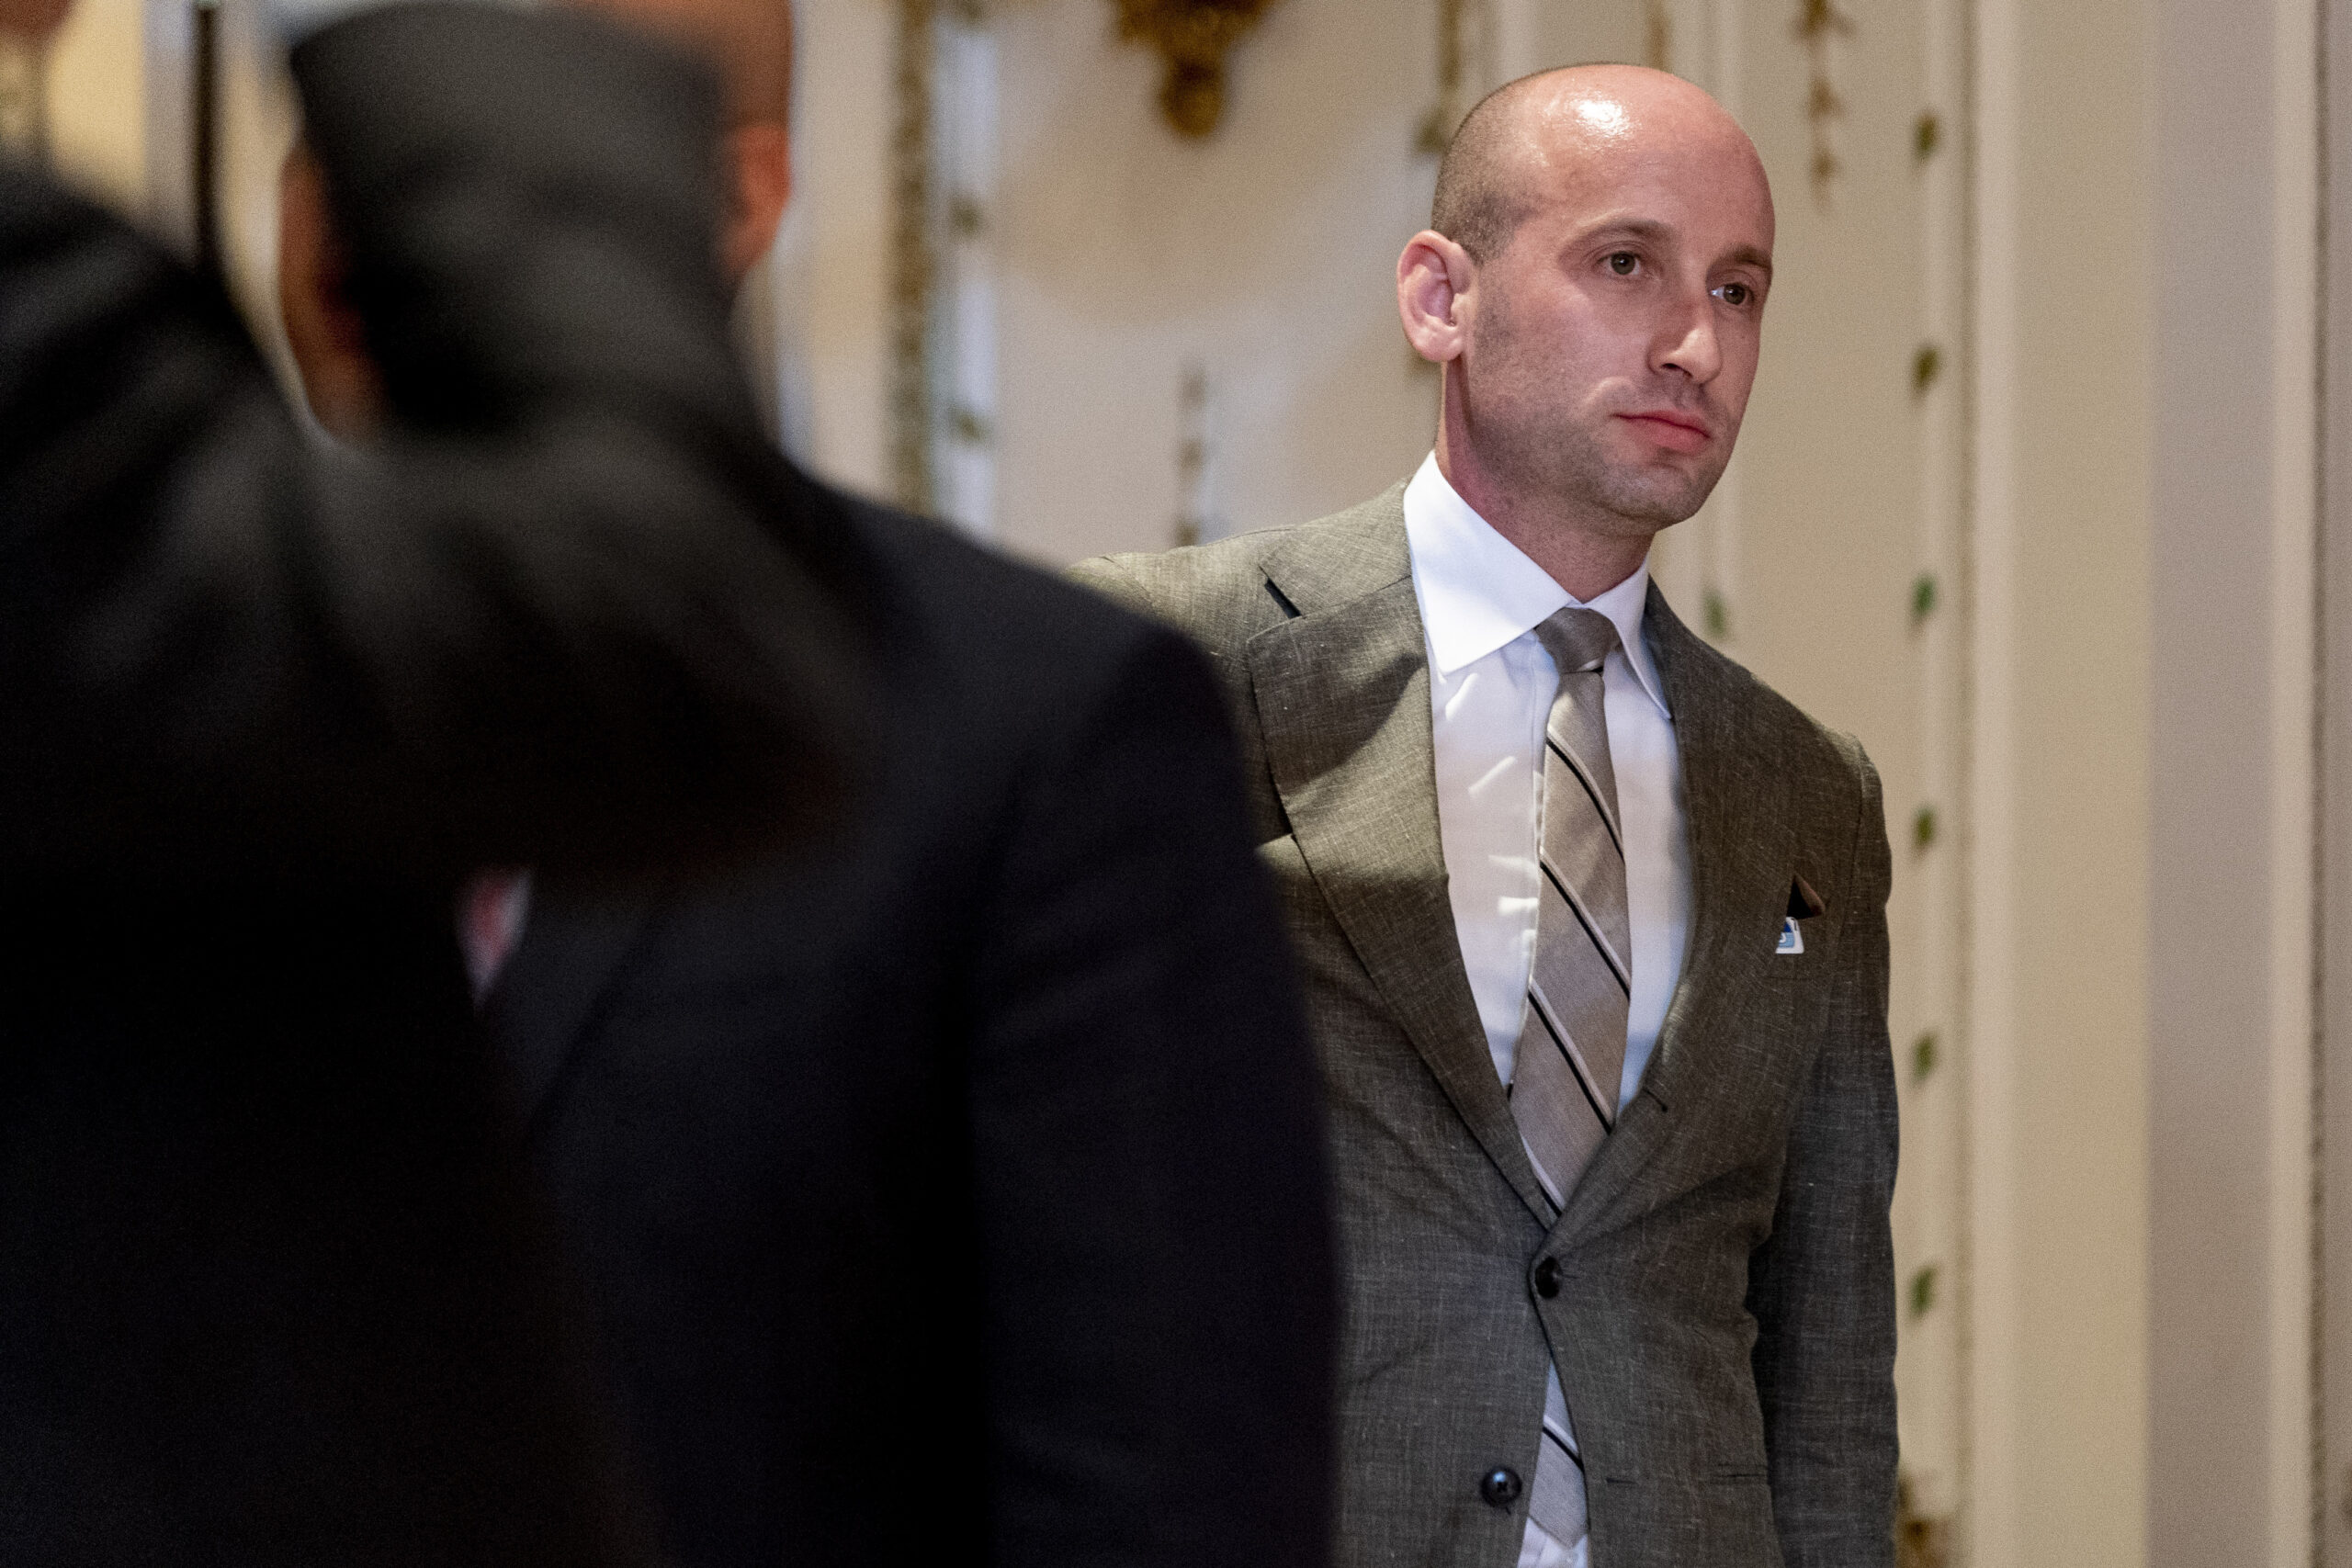 Stephen Miller appears before former President Donald Trump arrives to announce he is running for president for the third time at Mar-a-Lago in Palm Beach, Fla., Tuesday, Nov. 15, 2022.